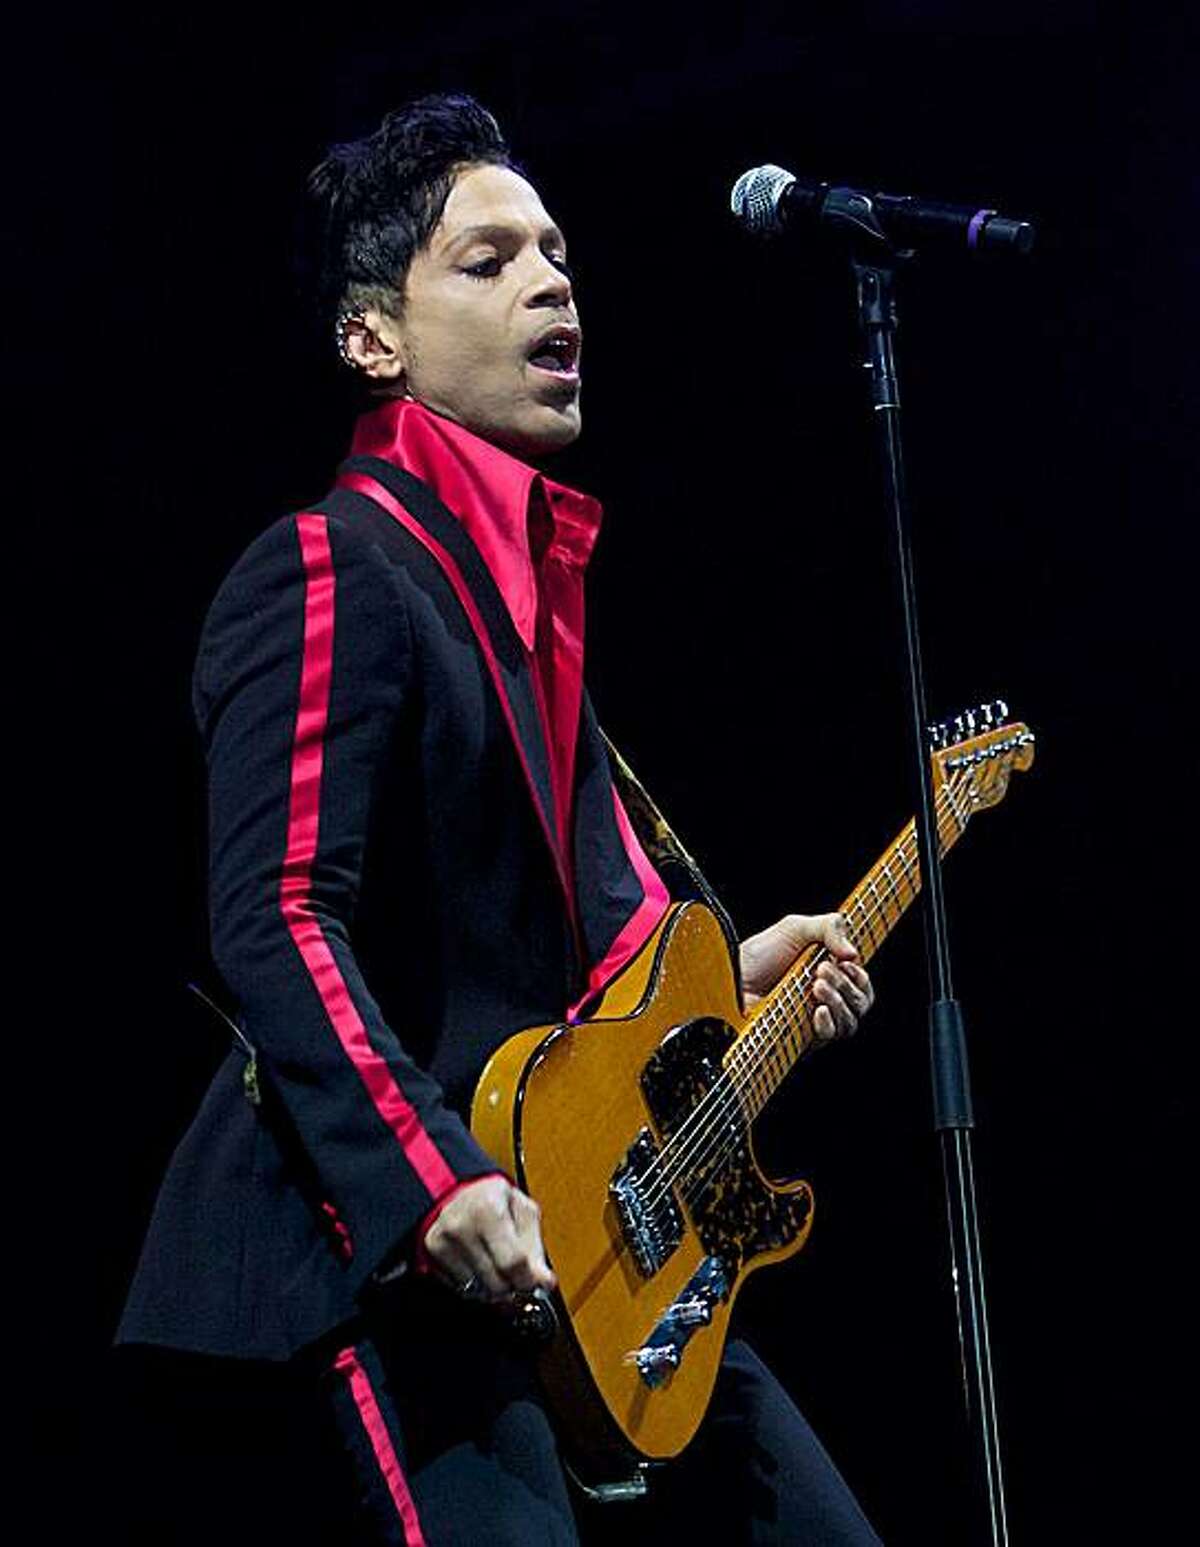 FILE - In this Nov. 14, 2010 file photo, musician Prince performs in Yas Island, on the final night of the F1 motor race meeting in Abu Dhabi, United Arab Emirates. The Prince concert set for Super Bowl weekend as a fundraiser for the art foundation founded by George Michael and his longtime partner, Kenny Goss, was a bust. The concert, recently moved from a tent in downtown Dallas, to a hotel just north of the city never materialized Friday, Feb. 4, 2011. An official with the Intercontinental Hotel confirmed that Prince never performed.